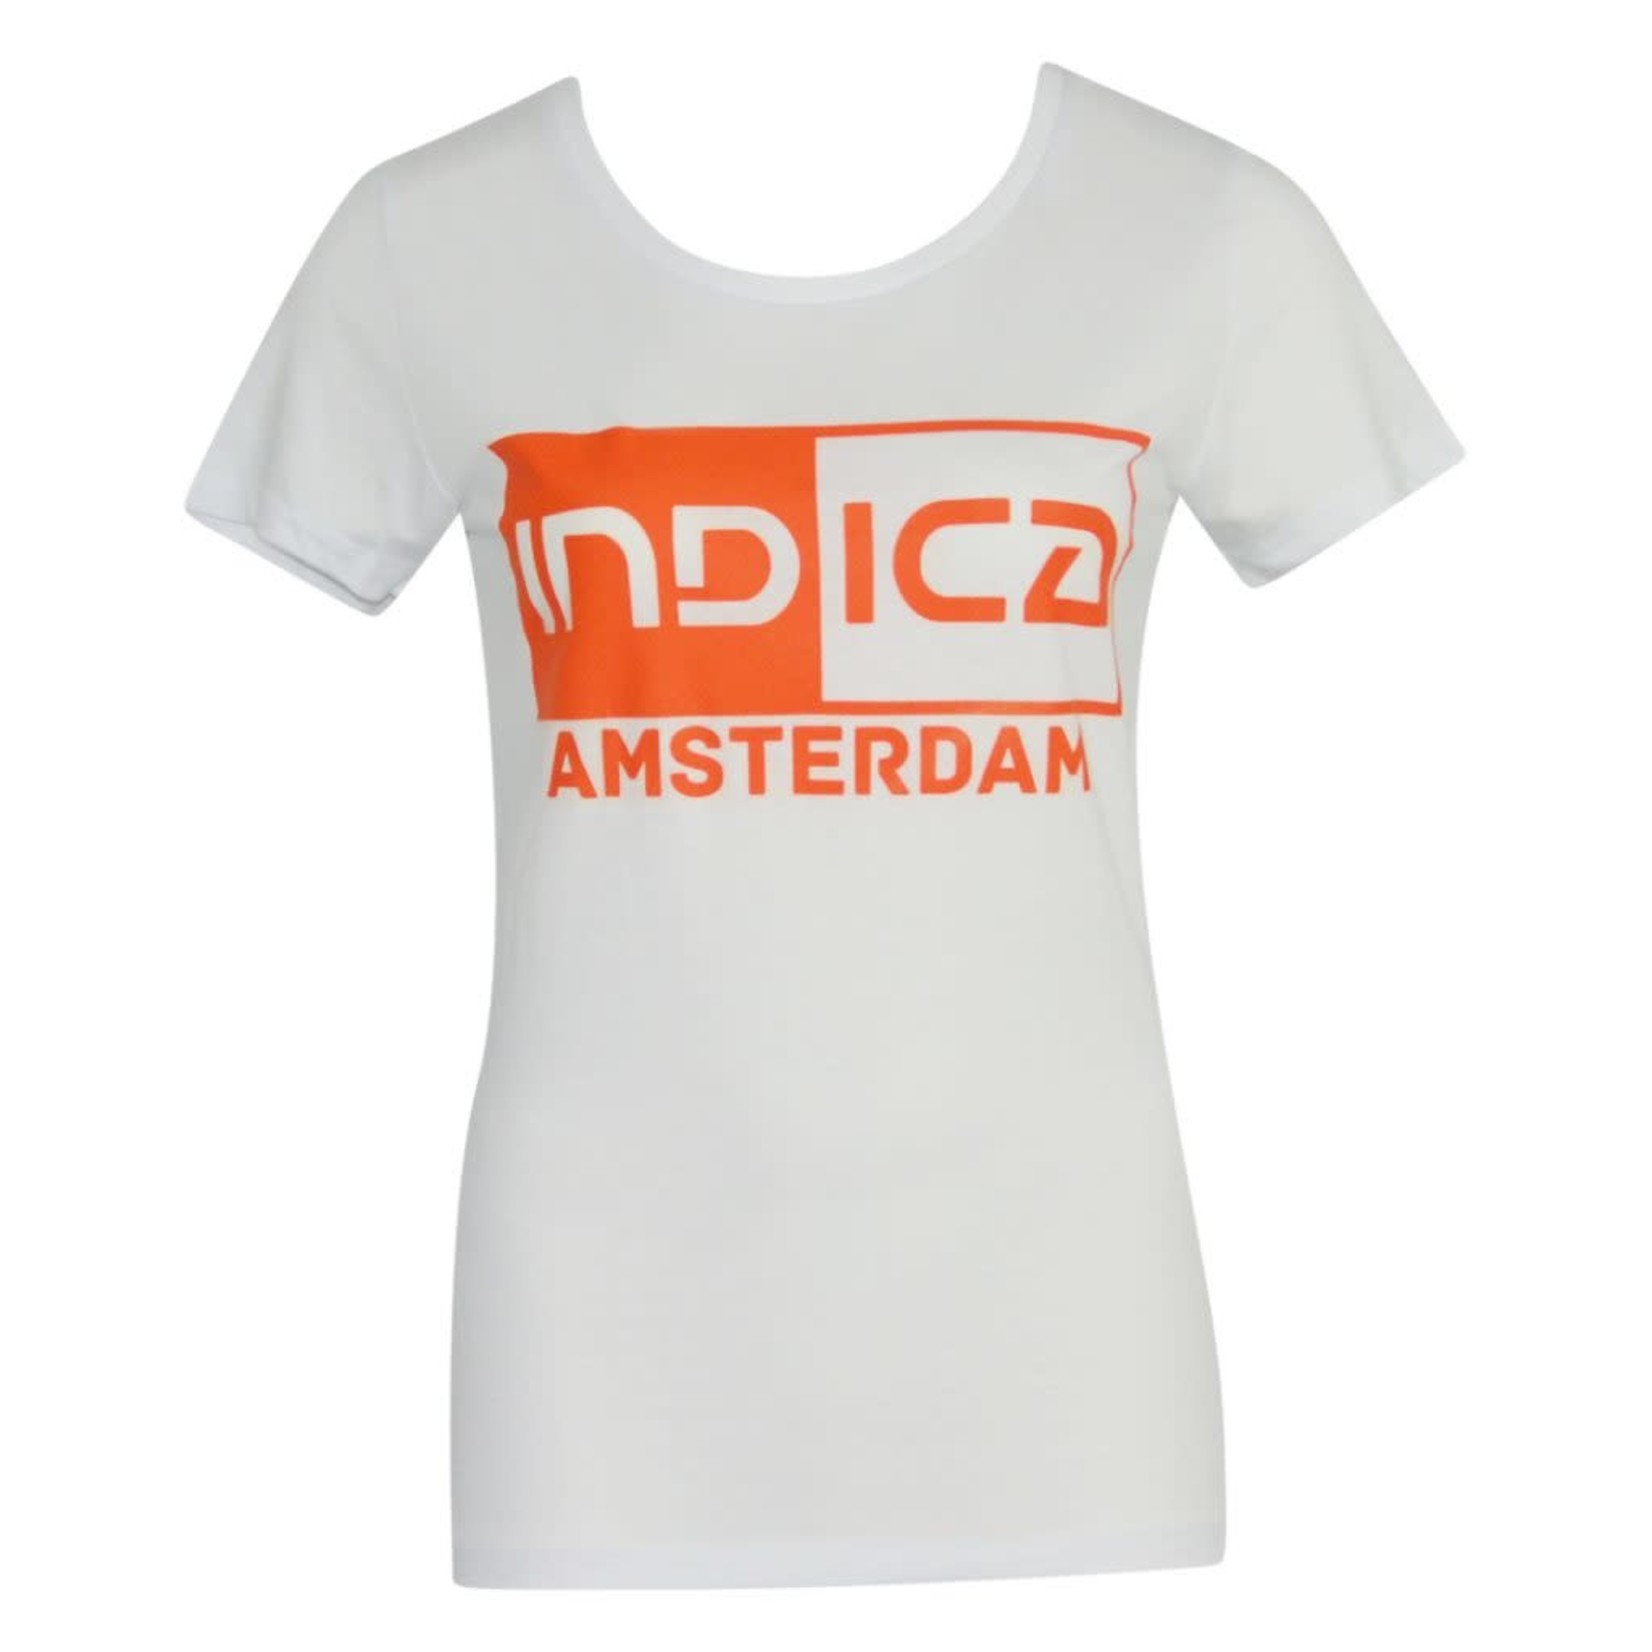 Indica Amsterdam T-Shirt Indica On